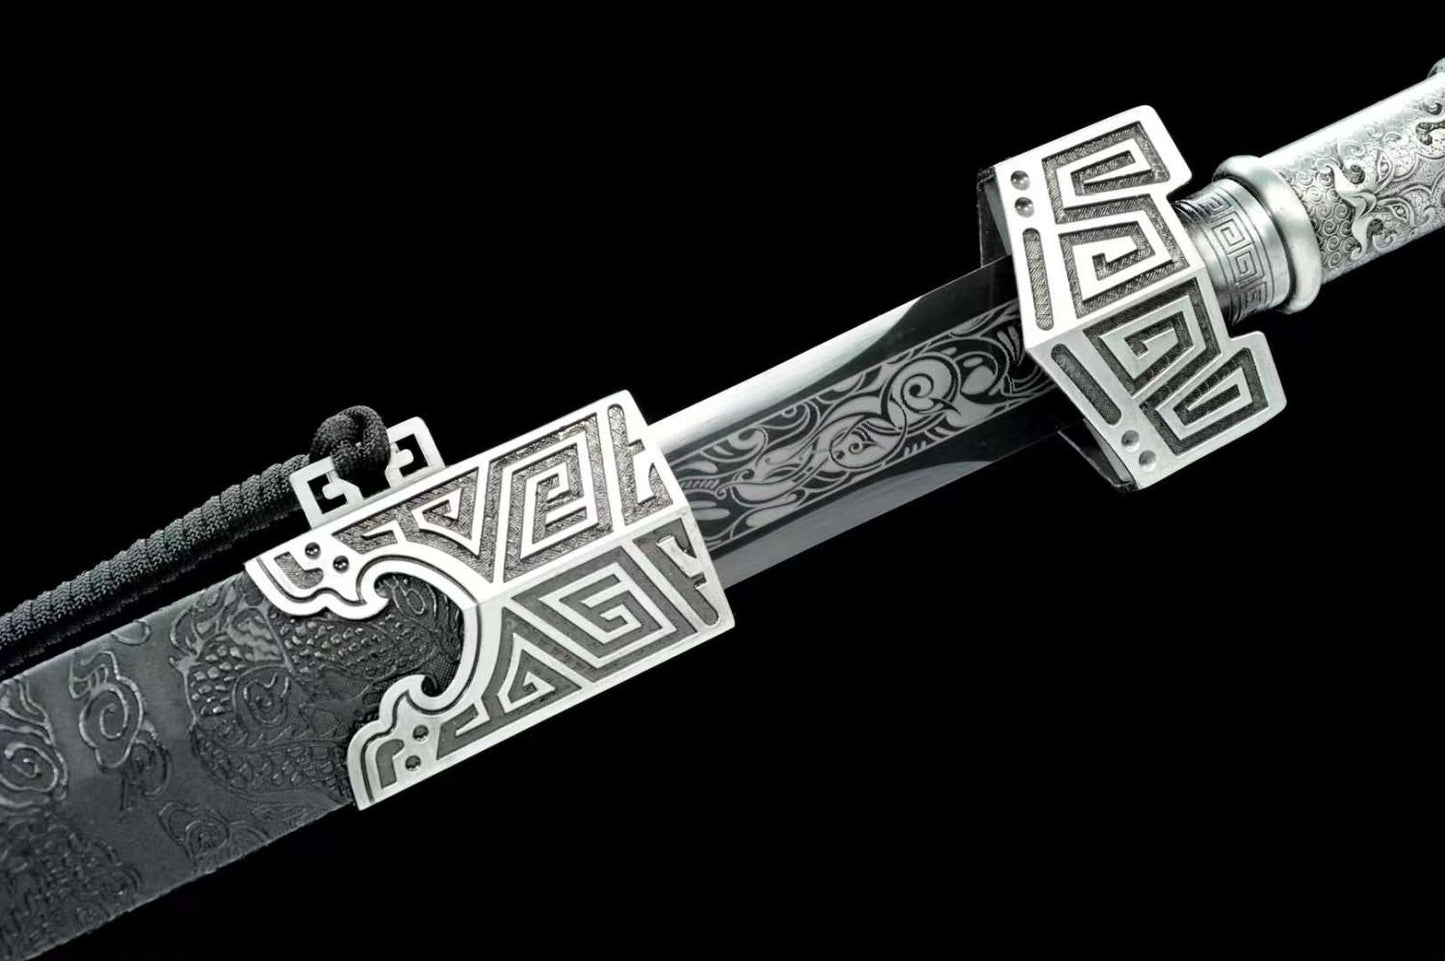 Qin Dynasty Style Sword - Traditional Forged High Carbon Steel - Faux Leather Scabbard